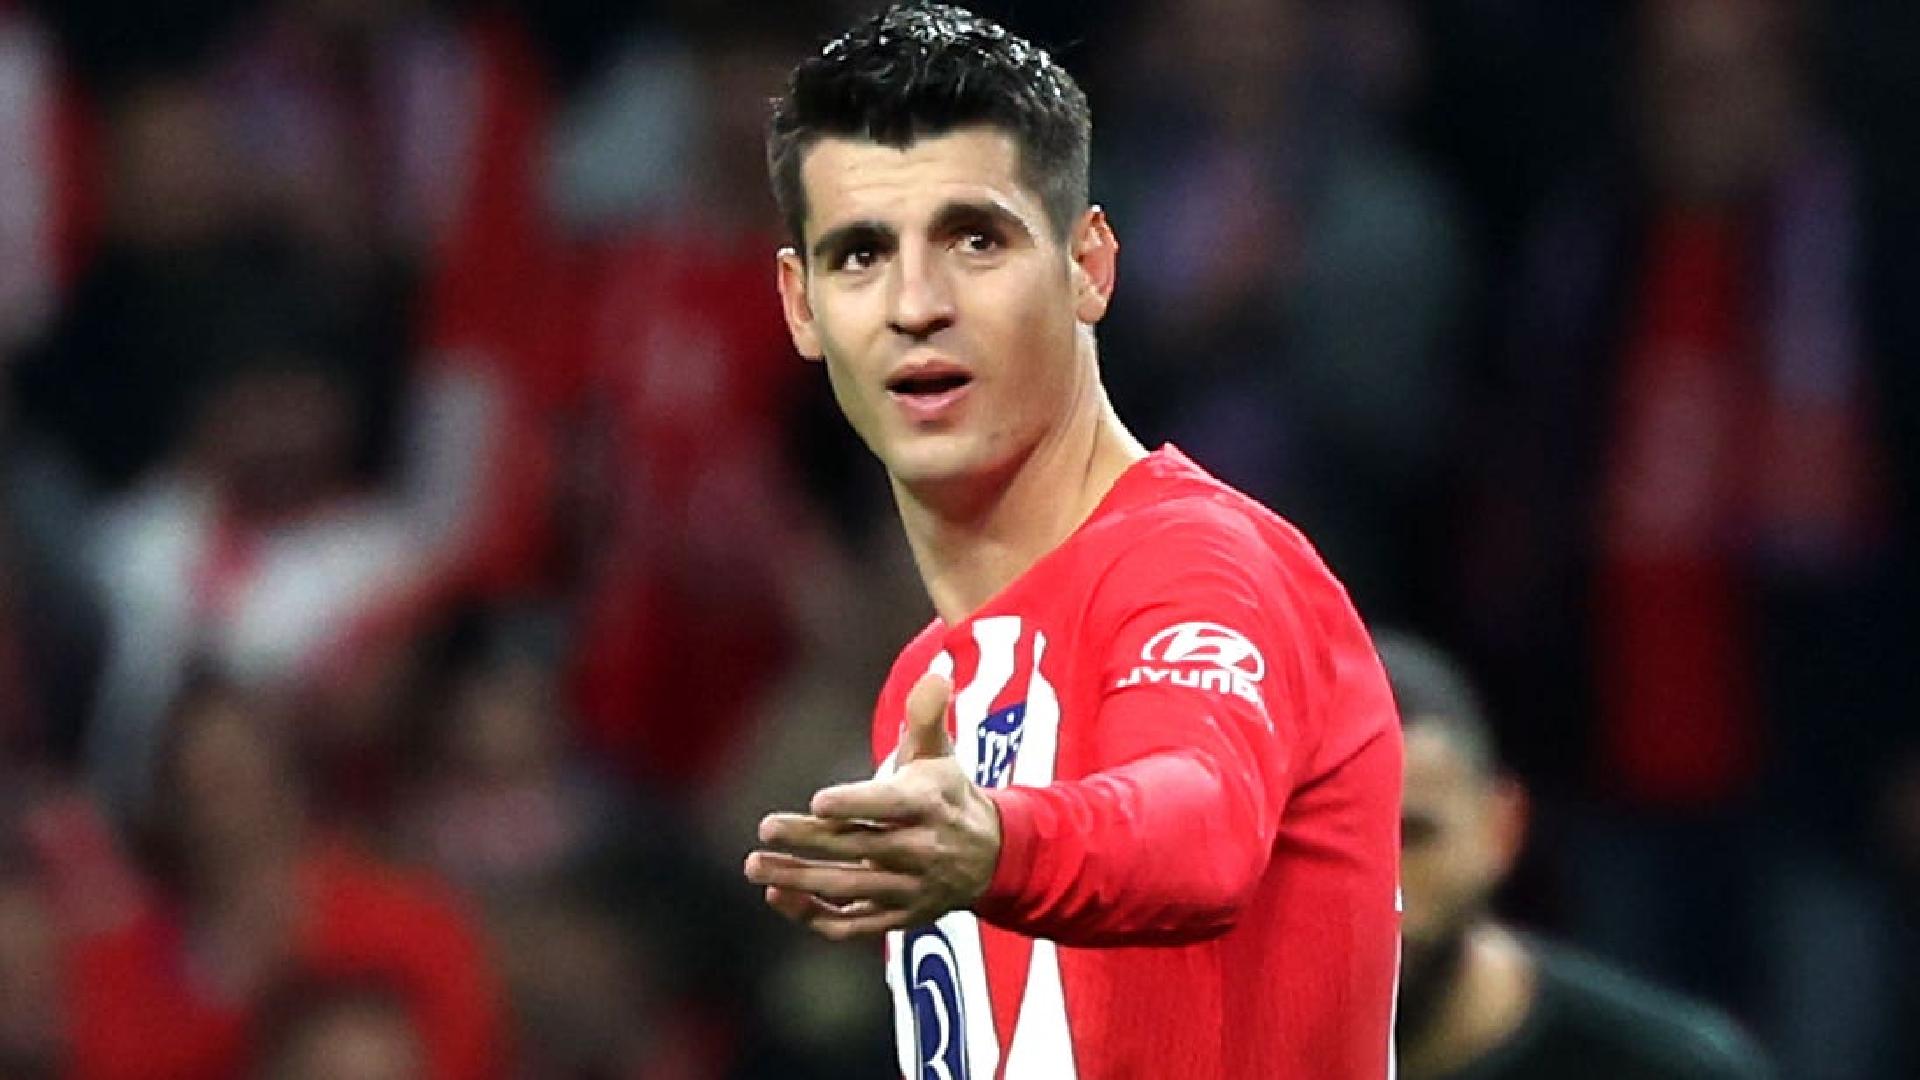 Alvaro Morata scored a hat-trick but Atletico Madrid lost (Isabel Infantes/PA Wire)